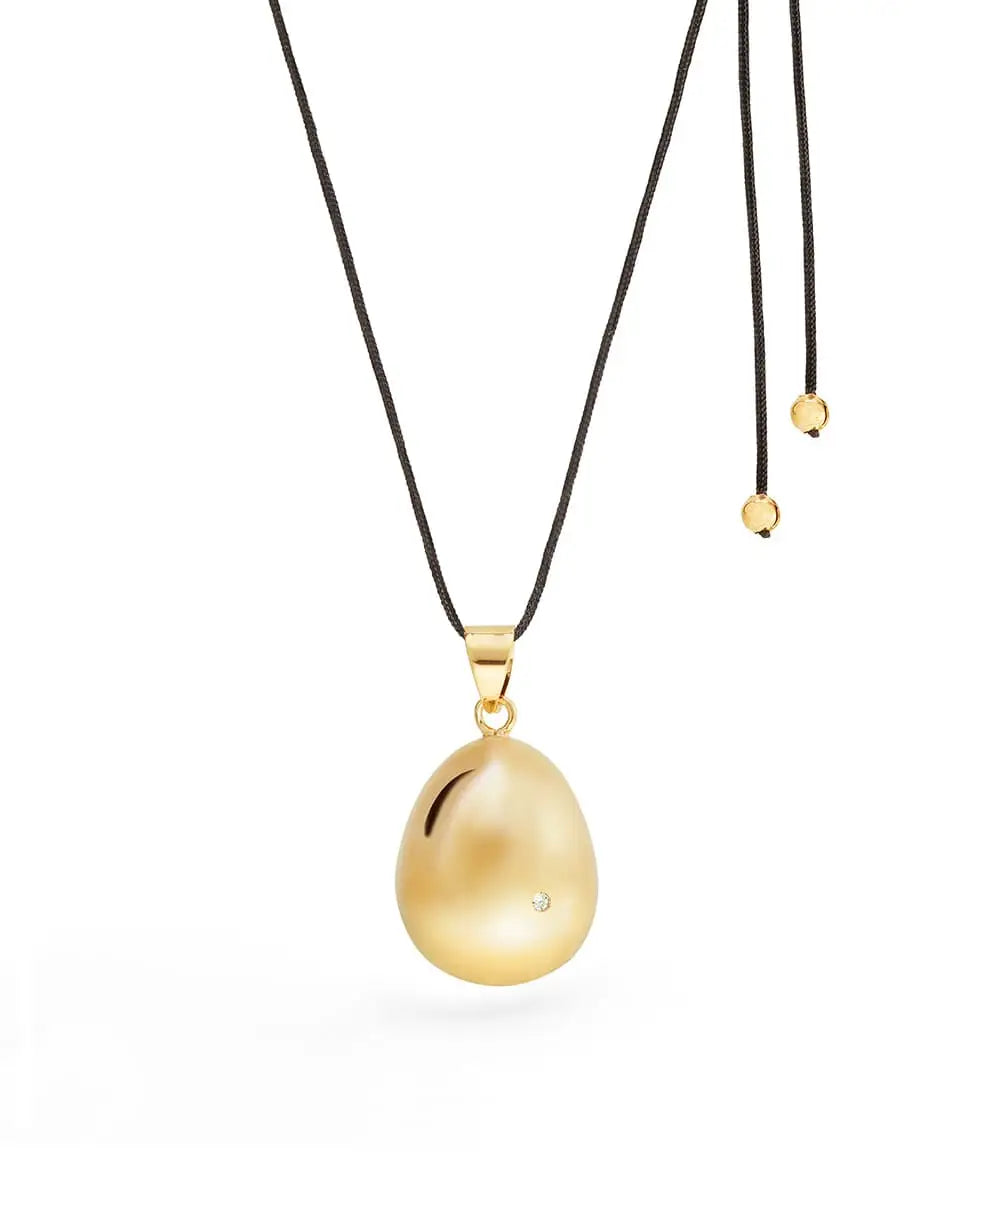 Mom-to-be necklace - Egg - Gold plated - swarovski crystal